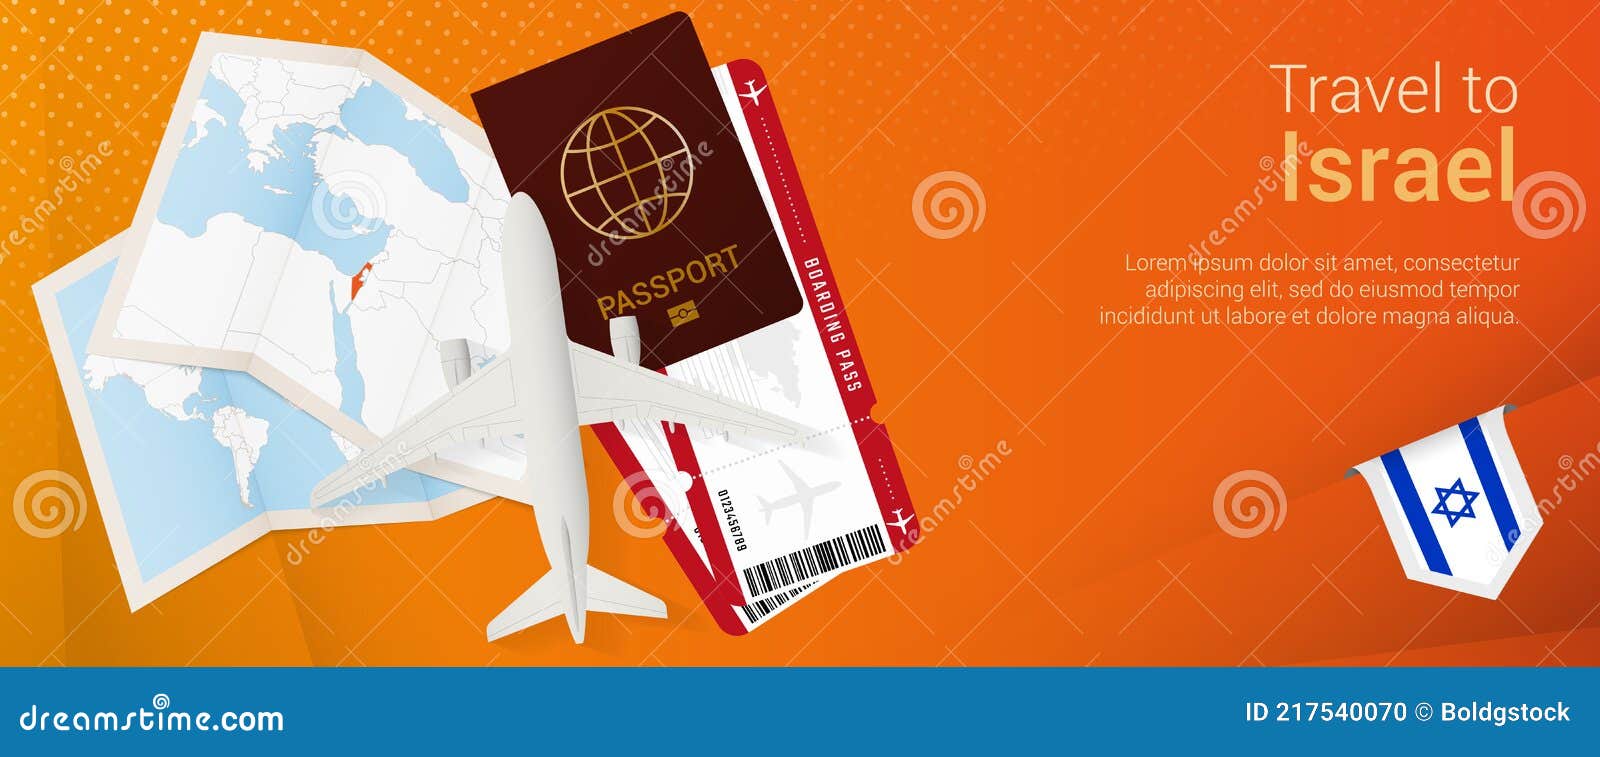 Travel To Israel Pop-under Banner. Trip Banner with Passport, Tickets, Airplane, Boarding Pass, Map and Flag of Israel Stock - Illustration of globe: